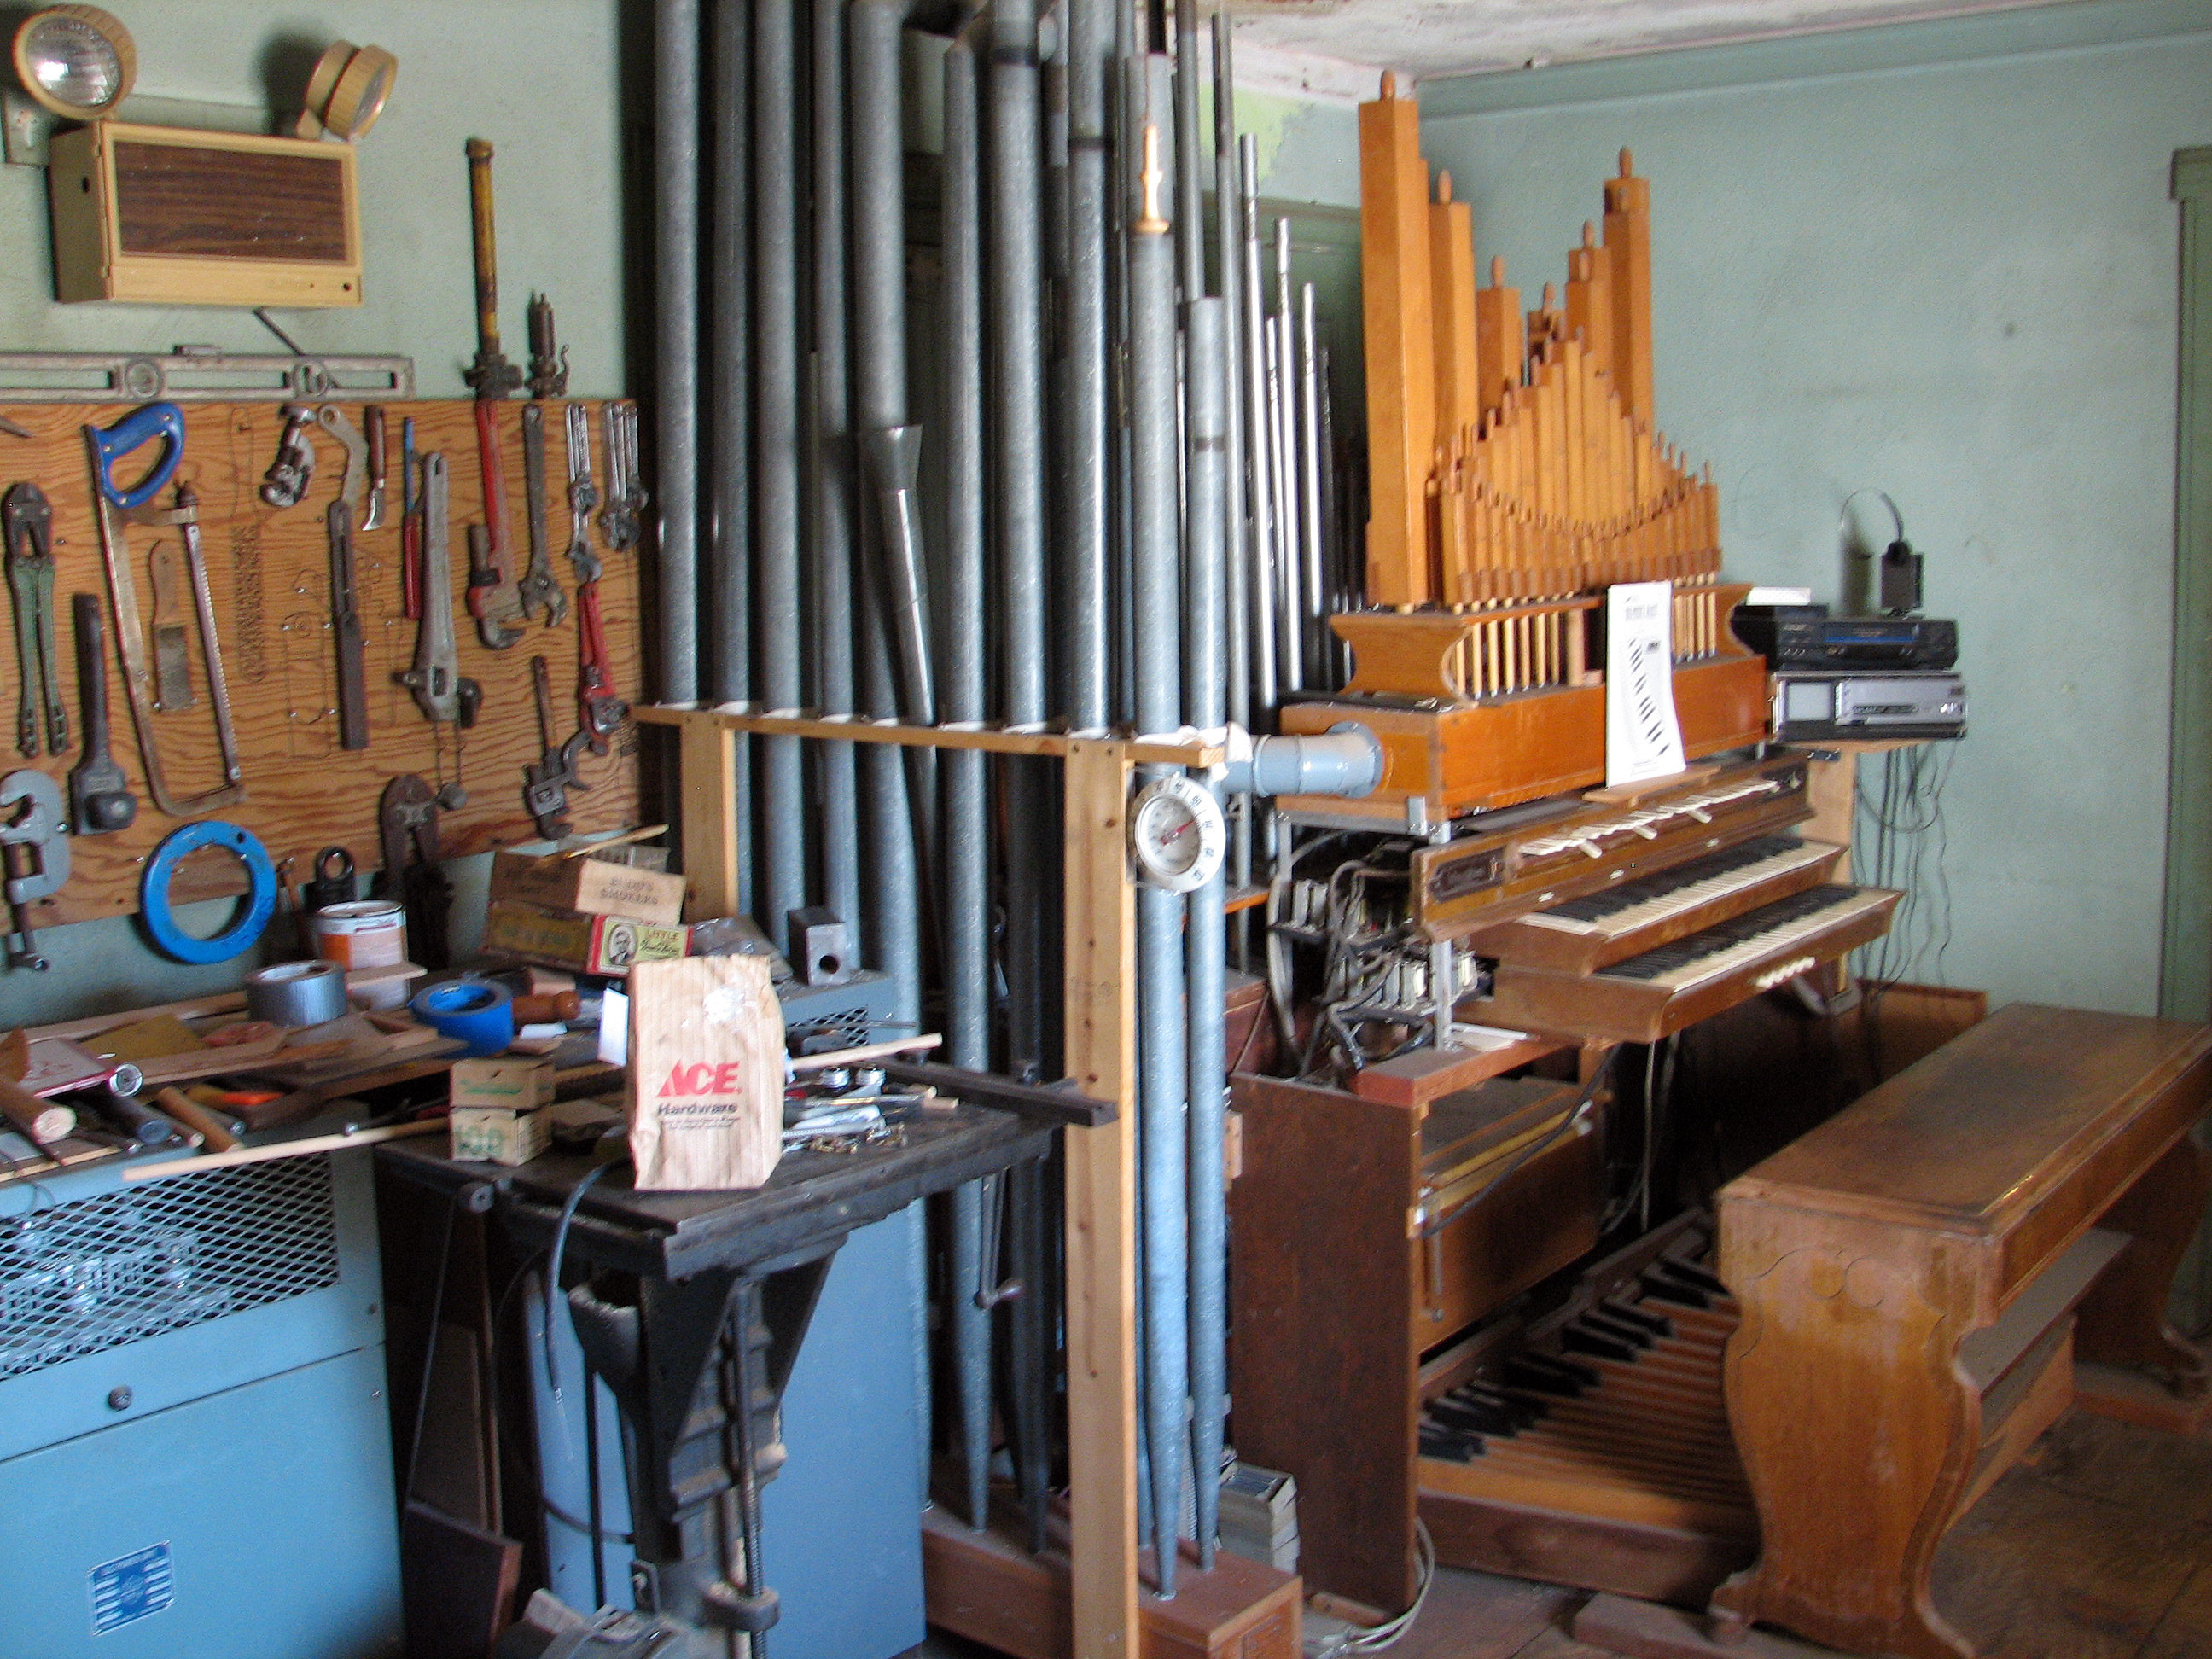 Click here to download a 1944 x 2592 JPG image showing the 2/3 Mighty Spohn Pipe Organ installed in the organ shop upstairs.